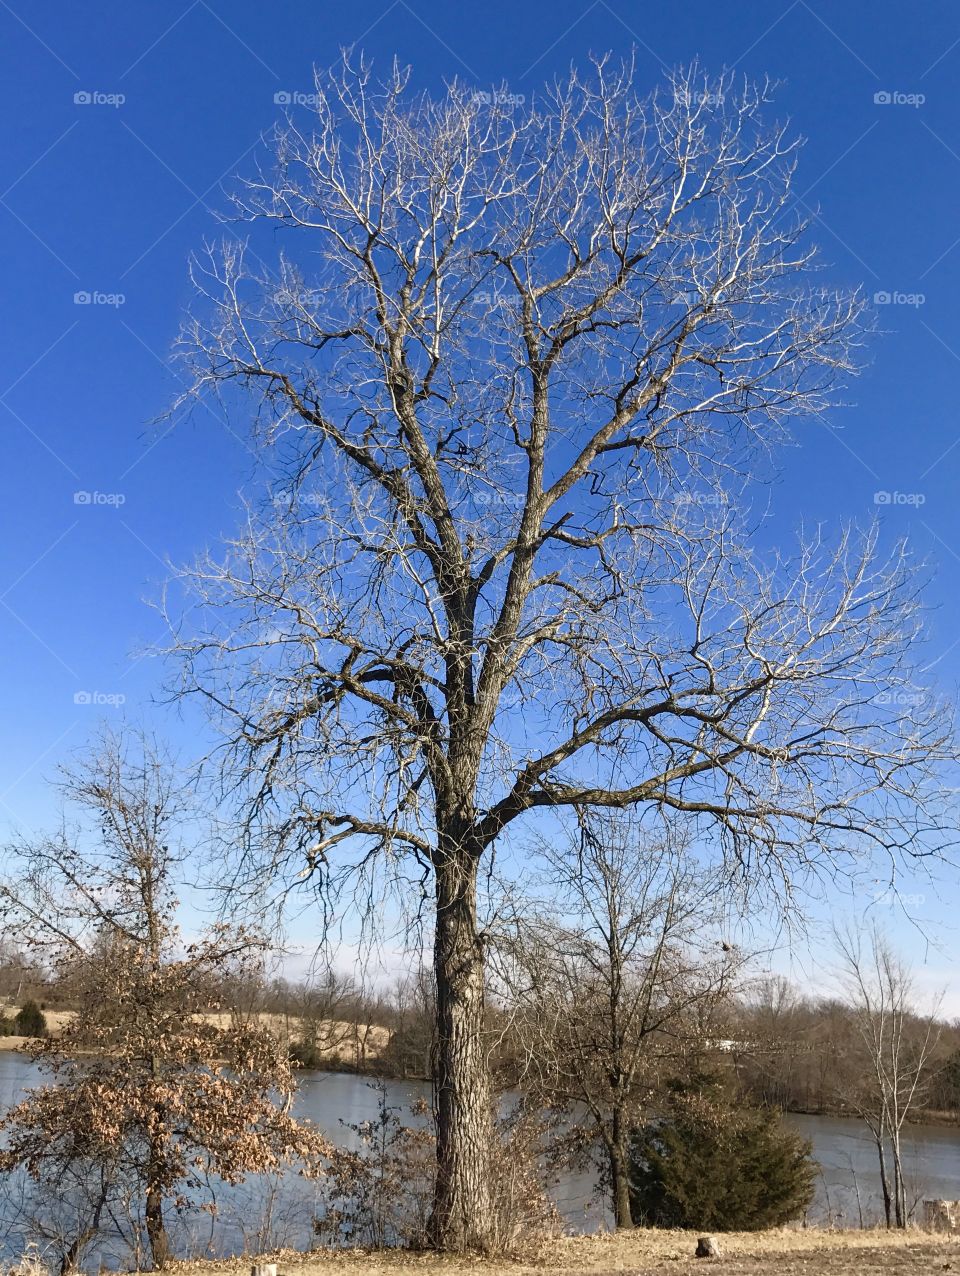 Scenic view of bare tree at lake side